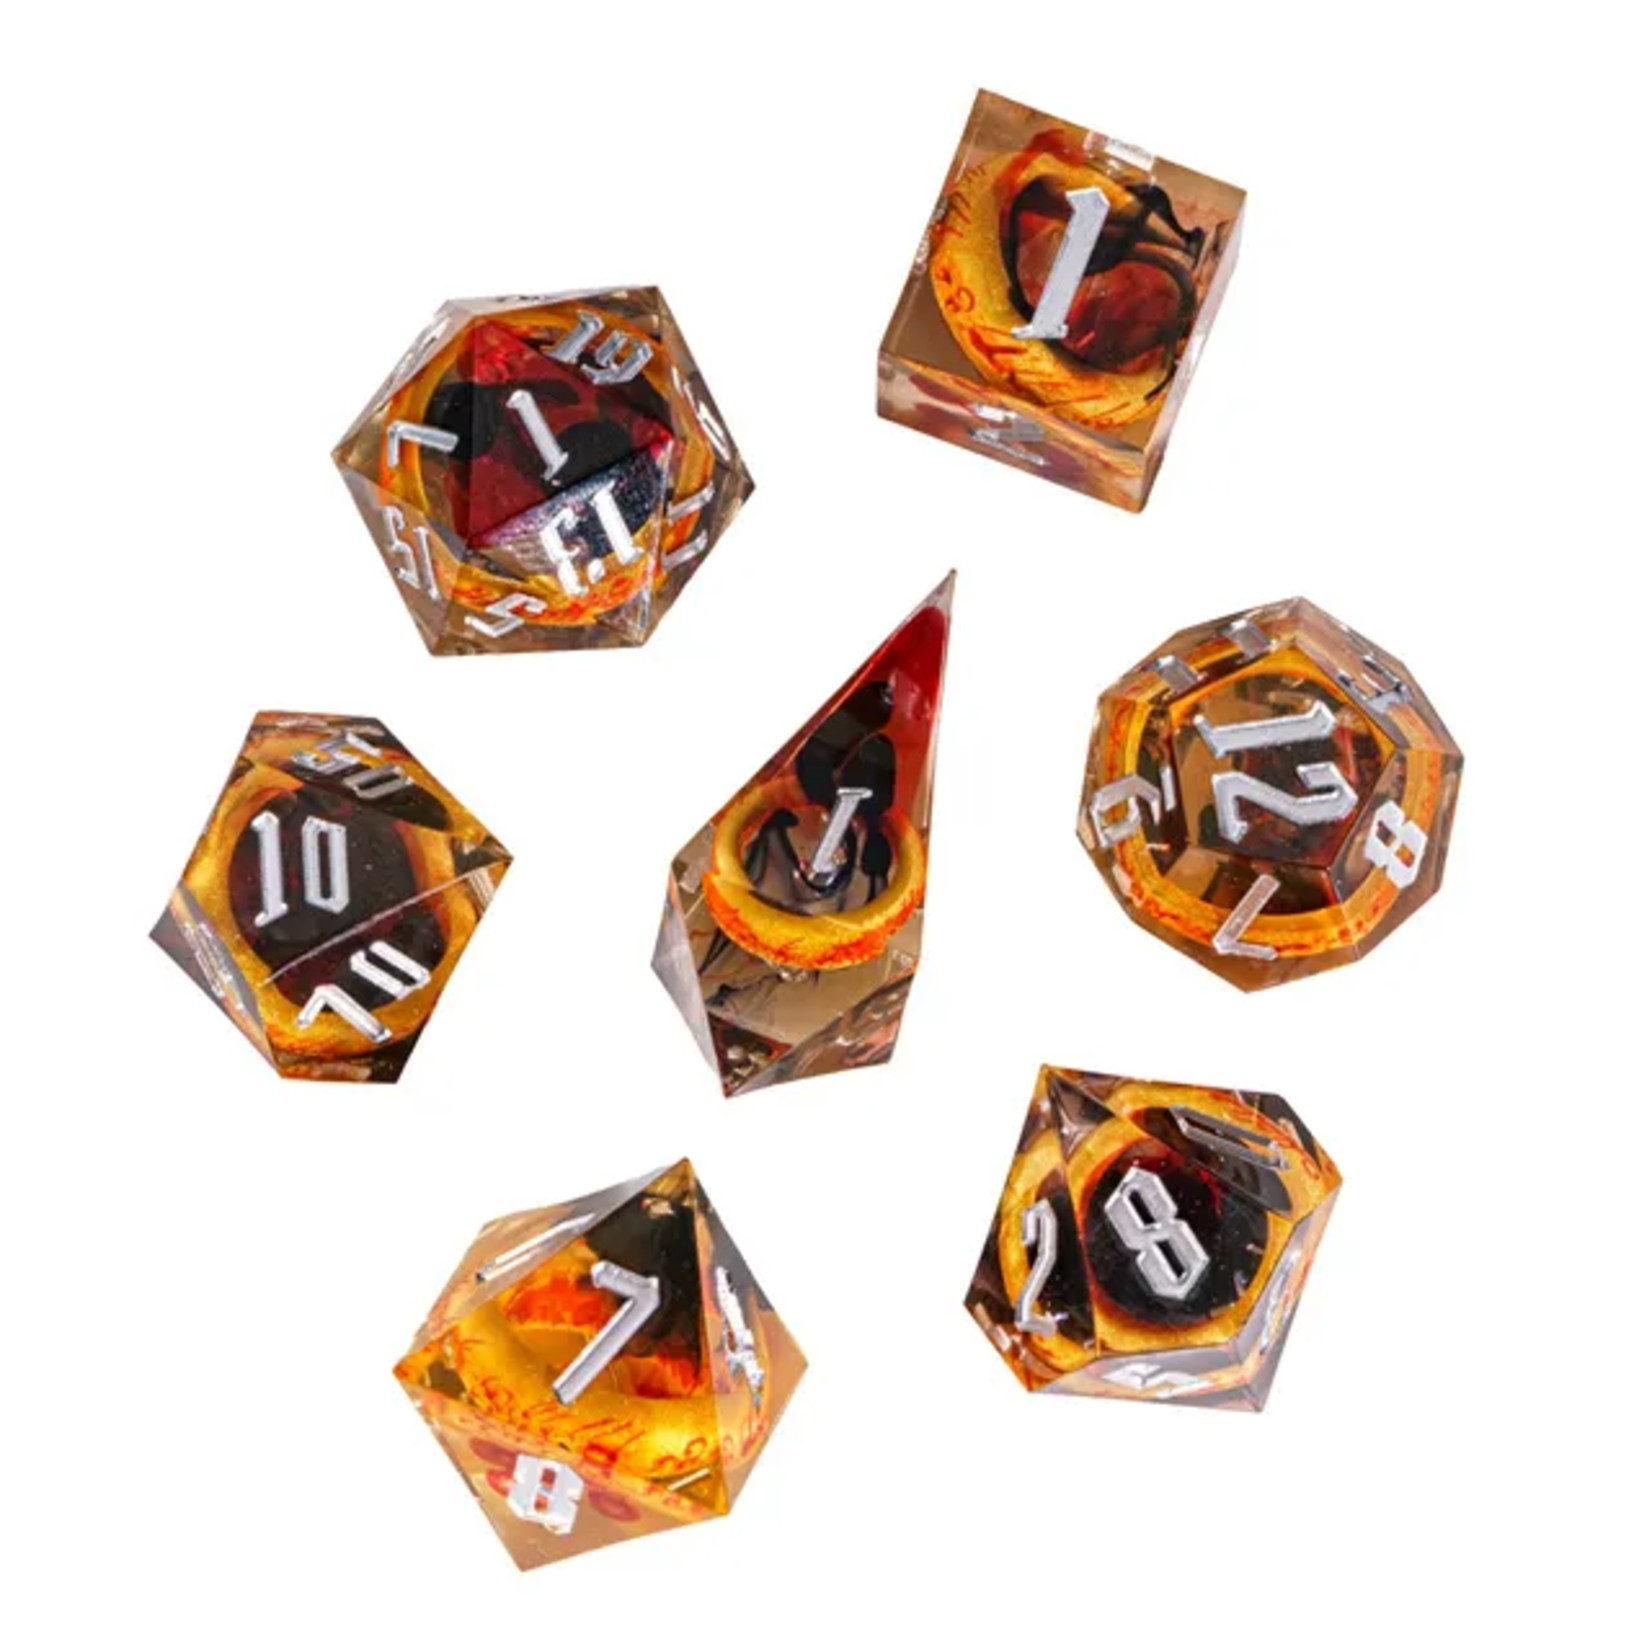 Cultivation Games Engraved Ring Dice of Power 7 die set